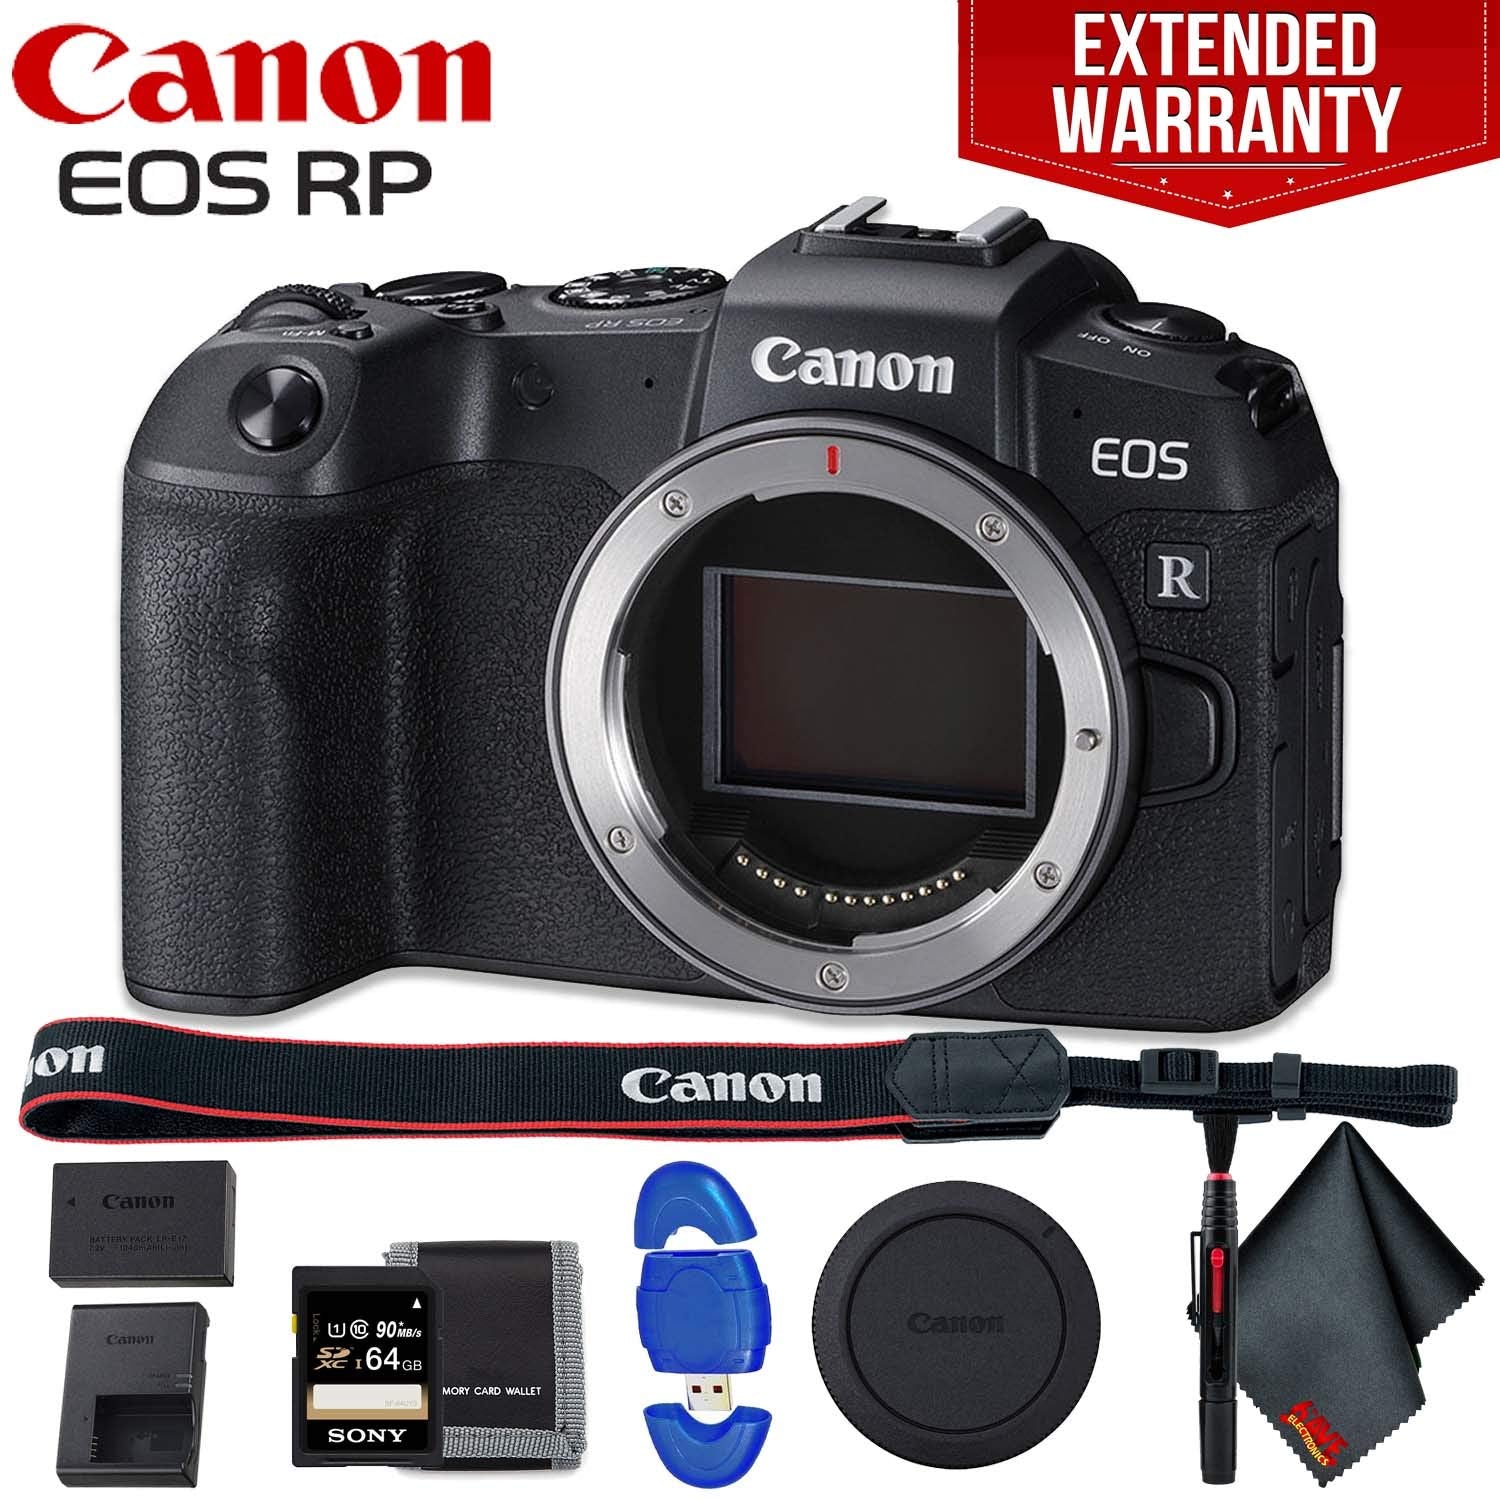 Canon EOS RP Mirrorless Digital Camera (Body Only) - Includes - Cleaning Kit and Memory Card Kit Bundle